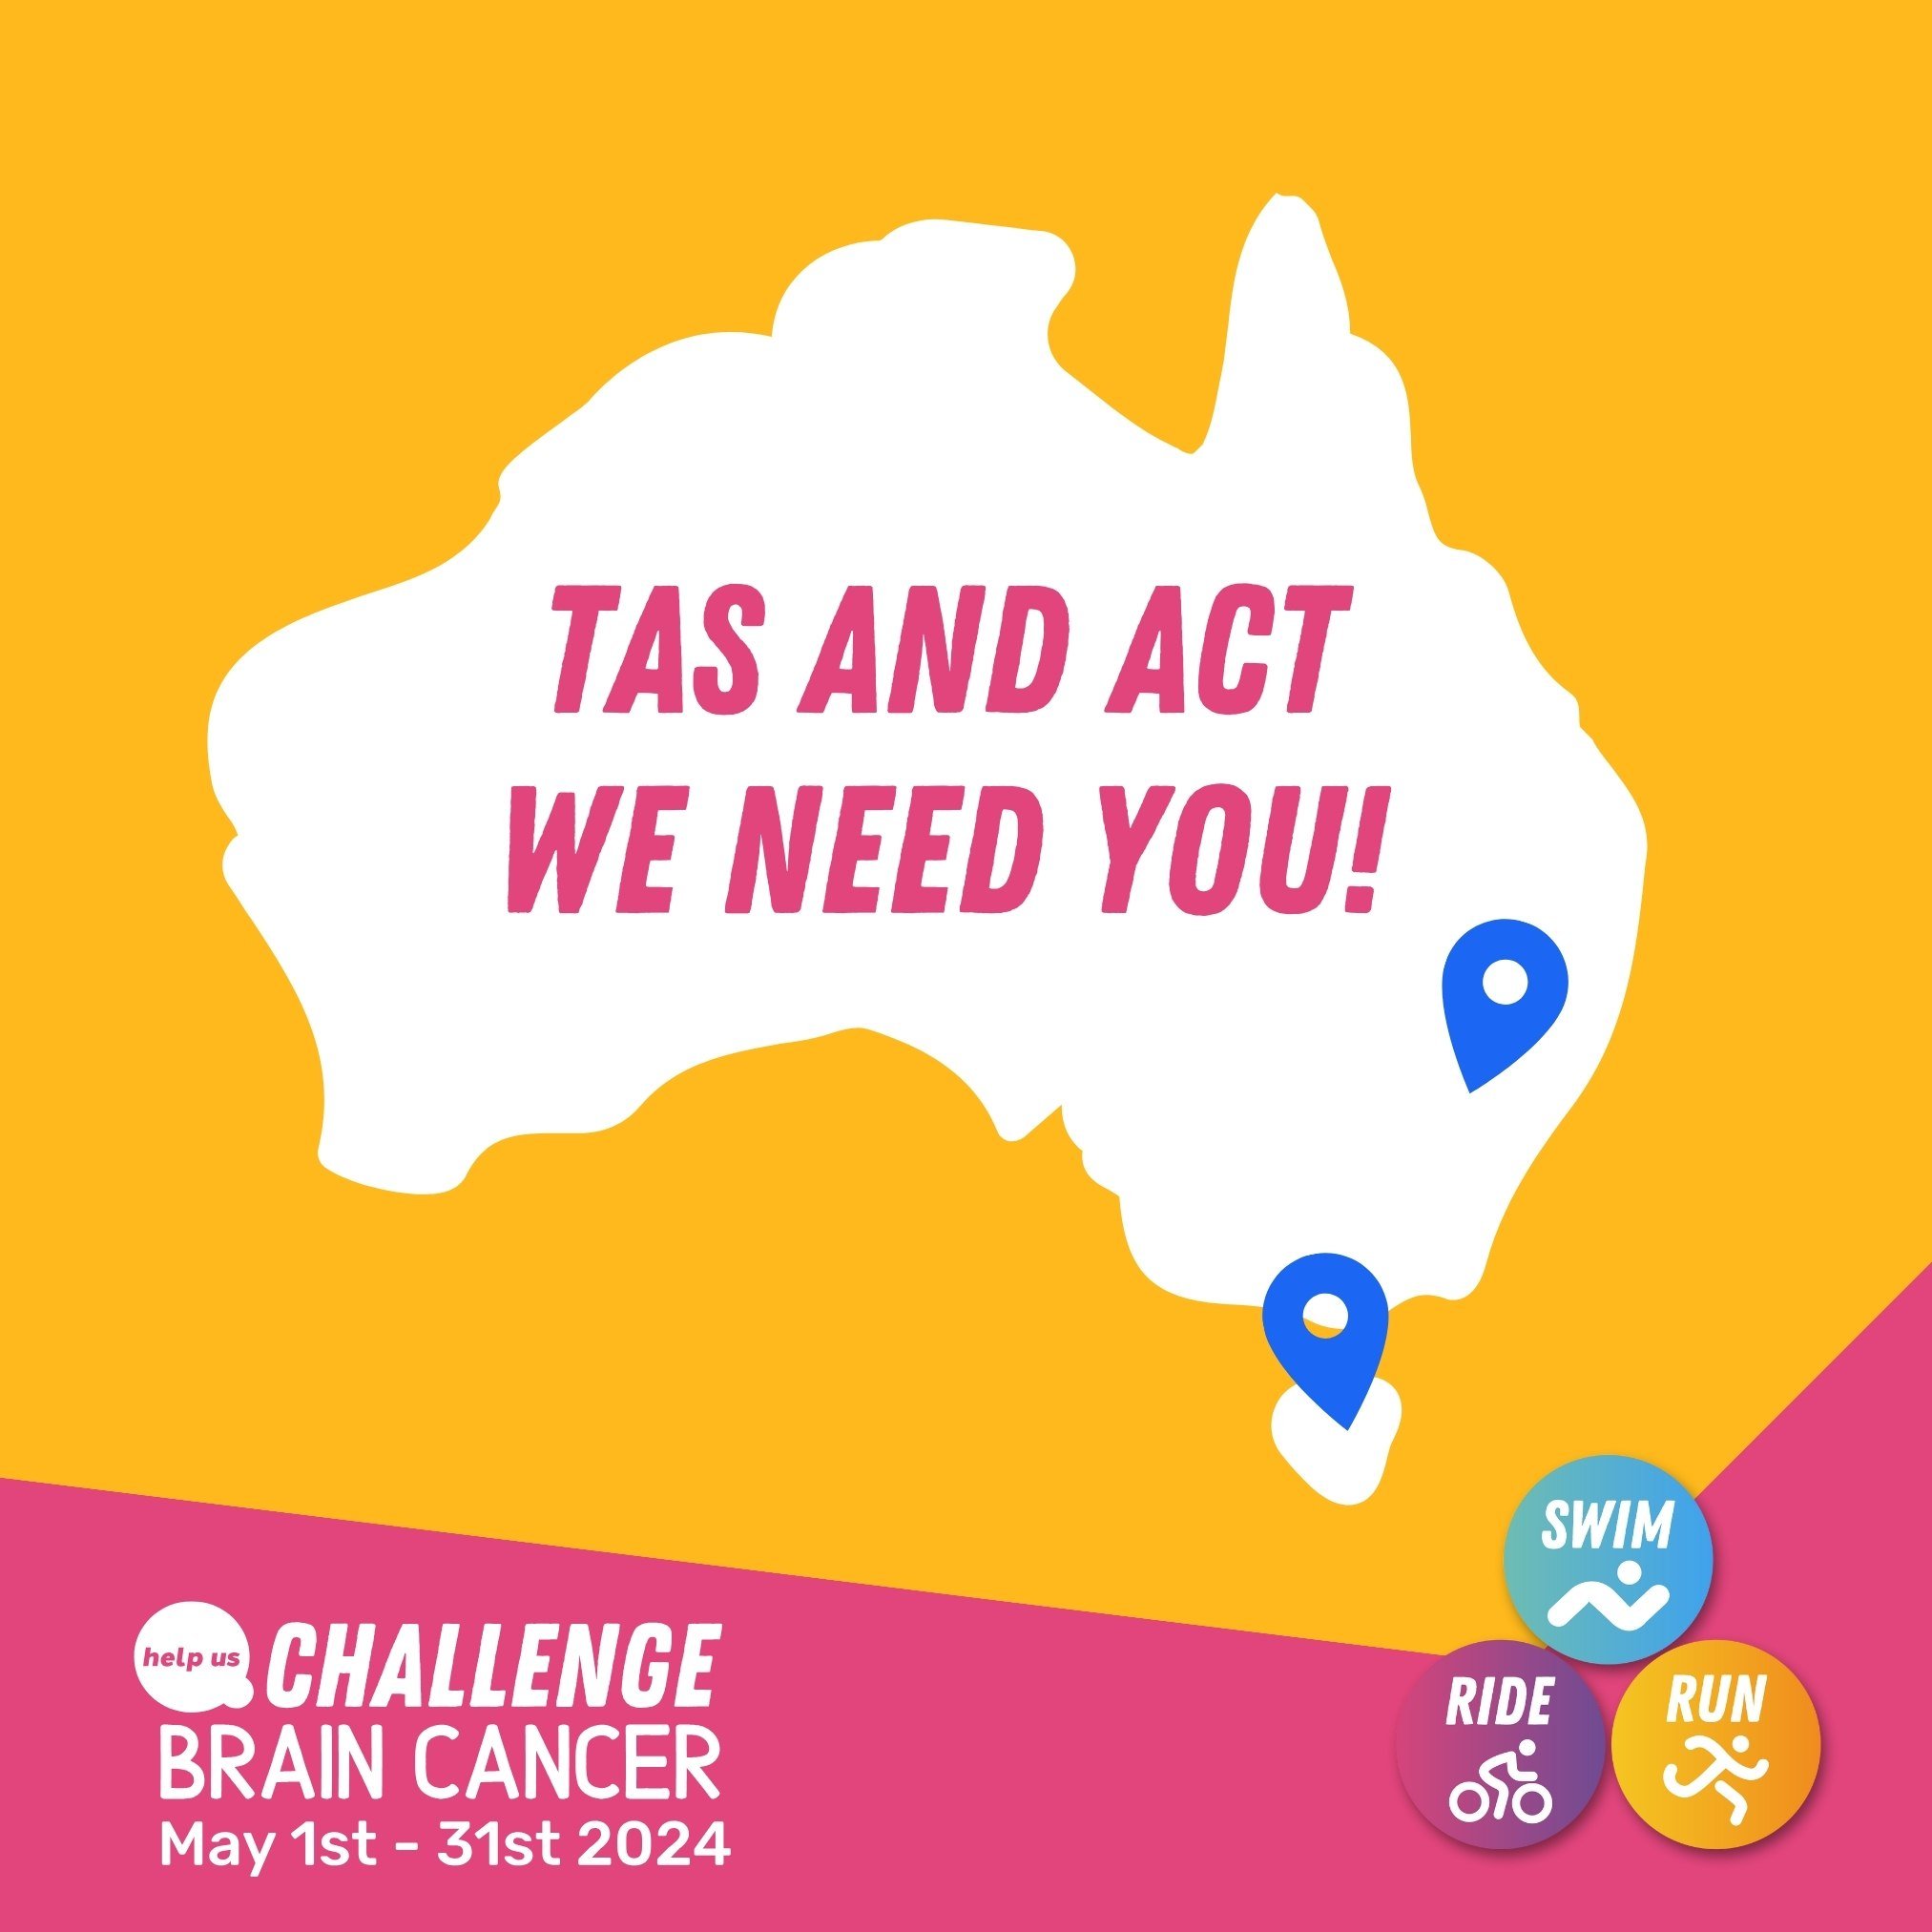 Are you from Tassie or the ACT? Want to help Peace of Mind Foundation take Challenge Brain Cancer 2024 nation wide? We've got participants from every state and territory signed up except for TAS and the ACT. Swim, Ride or Walk in May to help raise fu